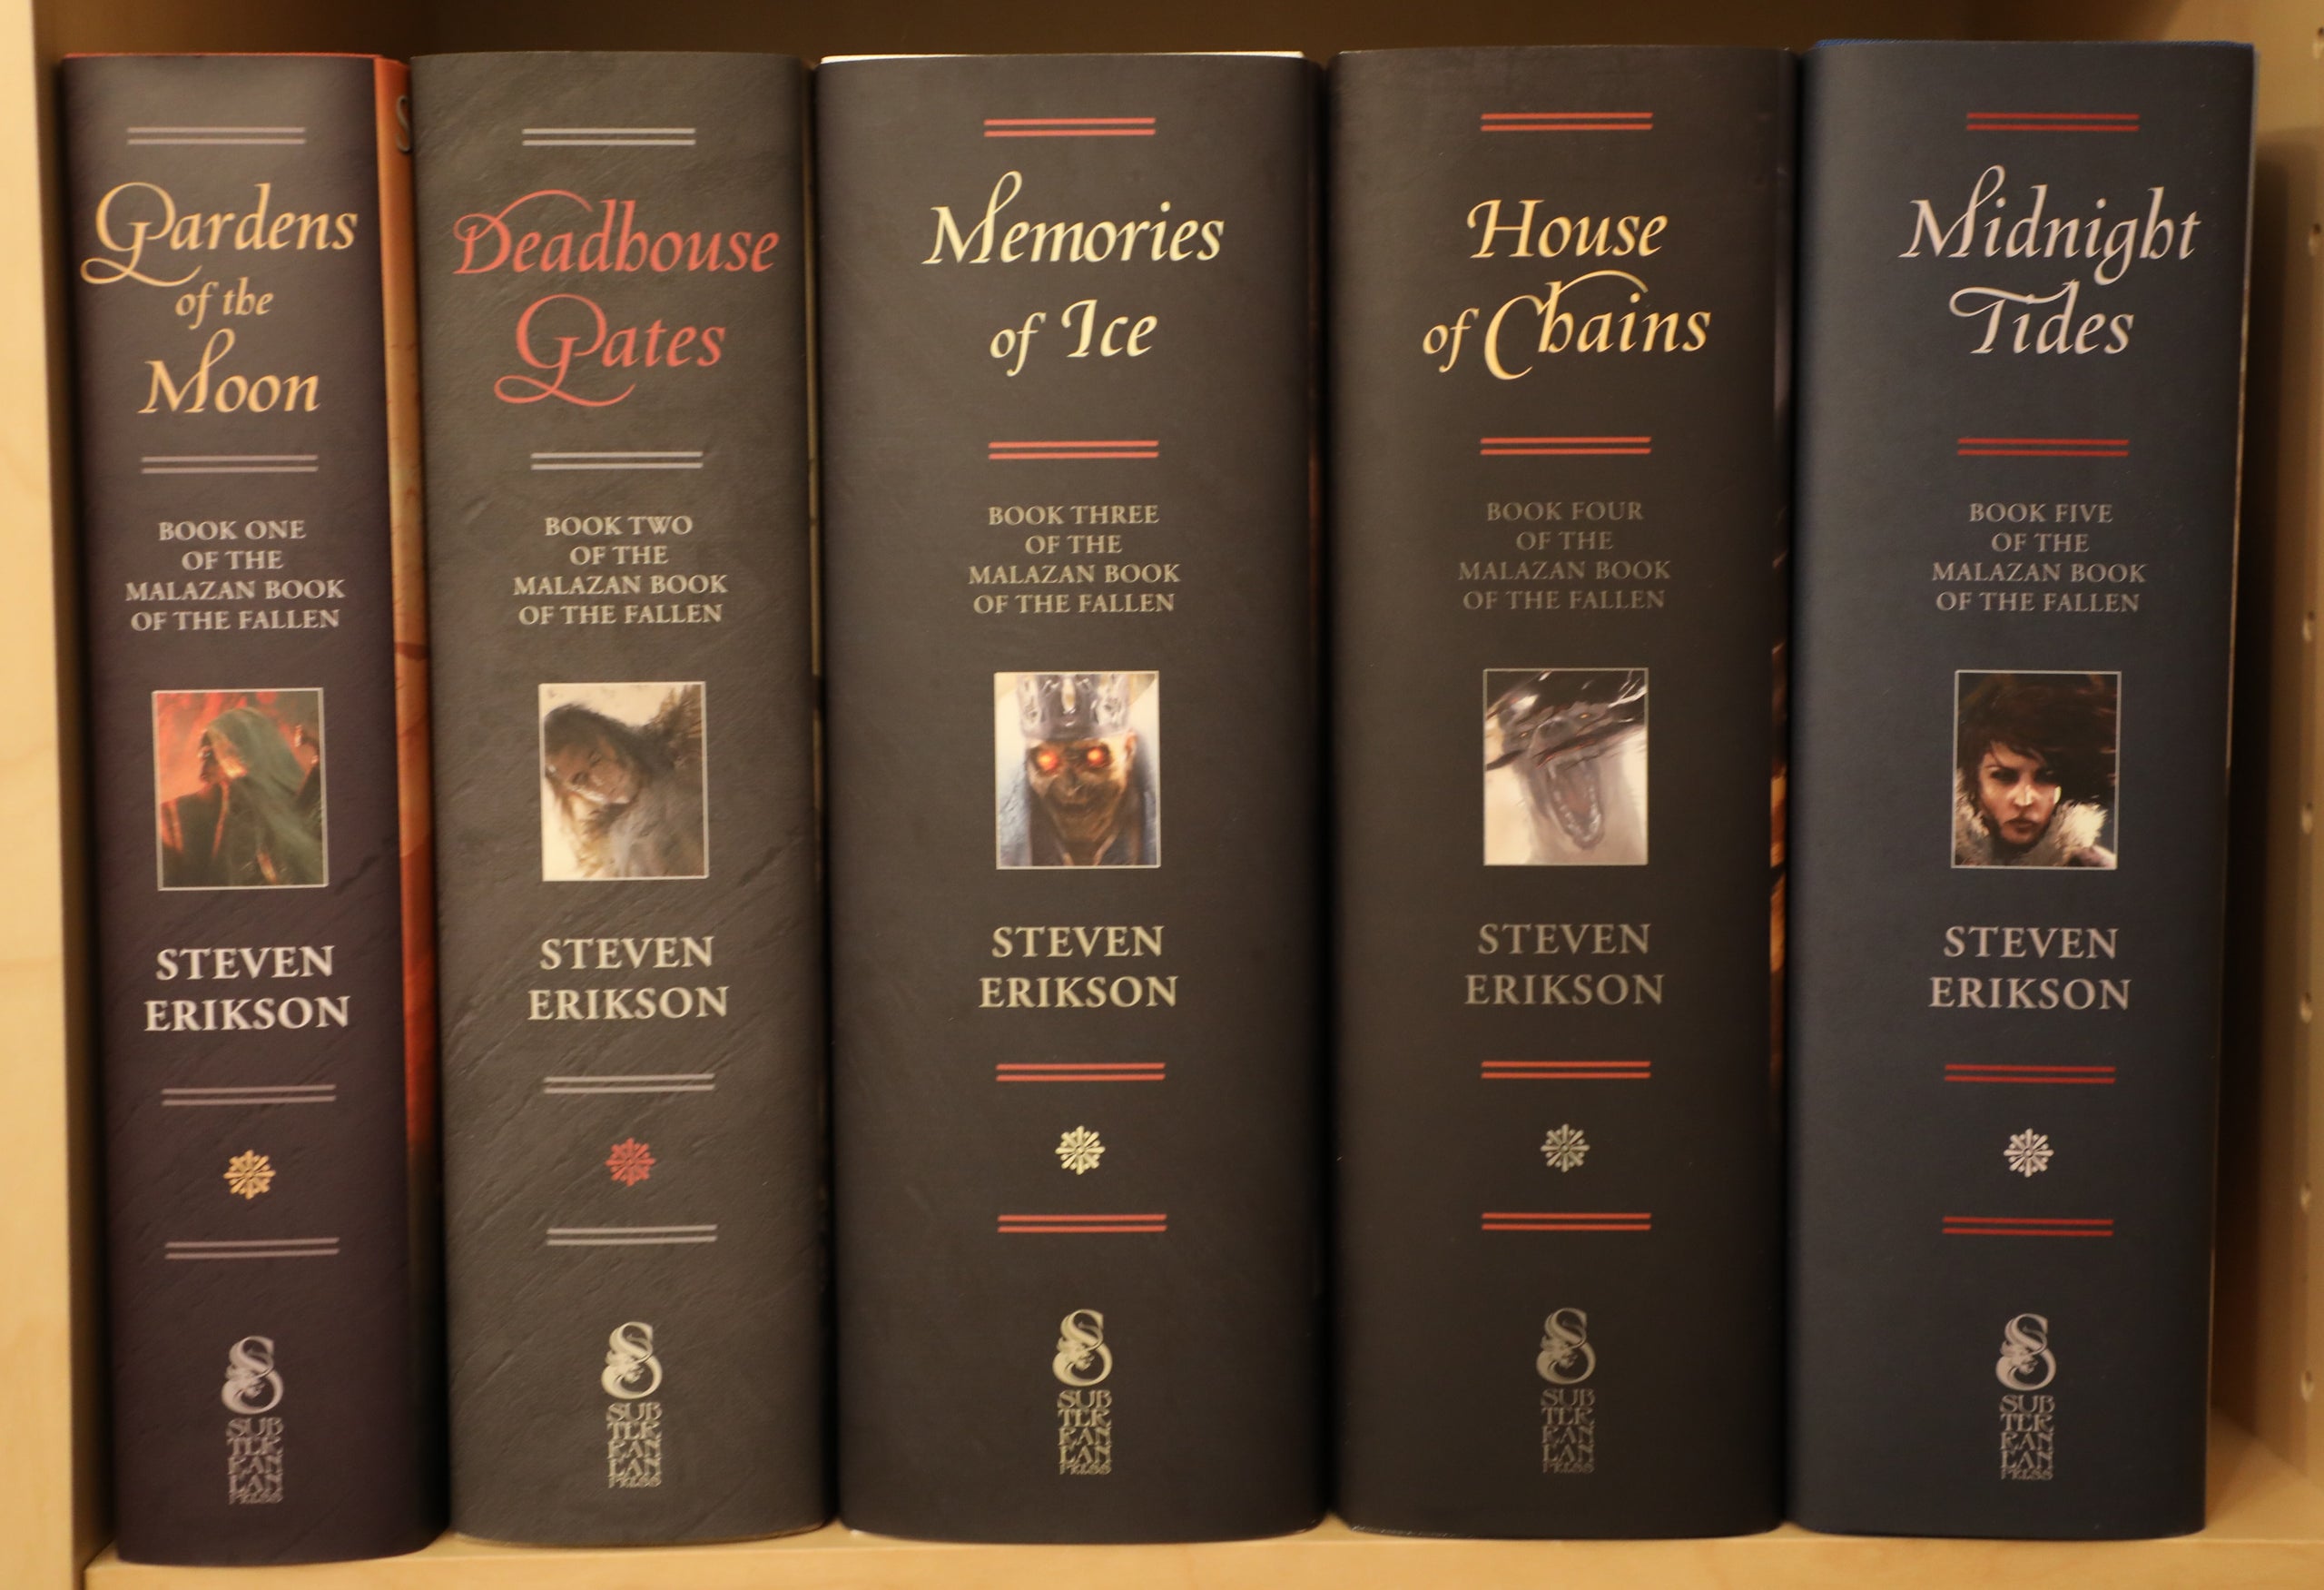 A Prelude to my Malazan Book of the Fallen Reading Challenge